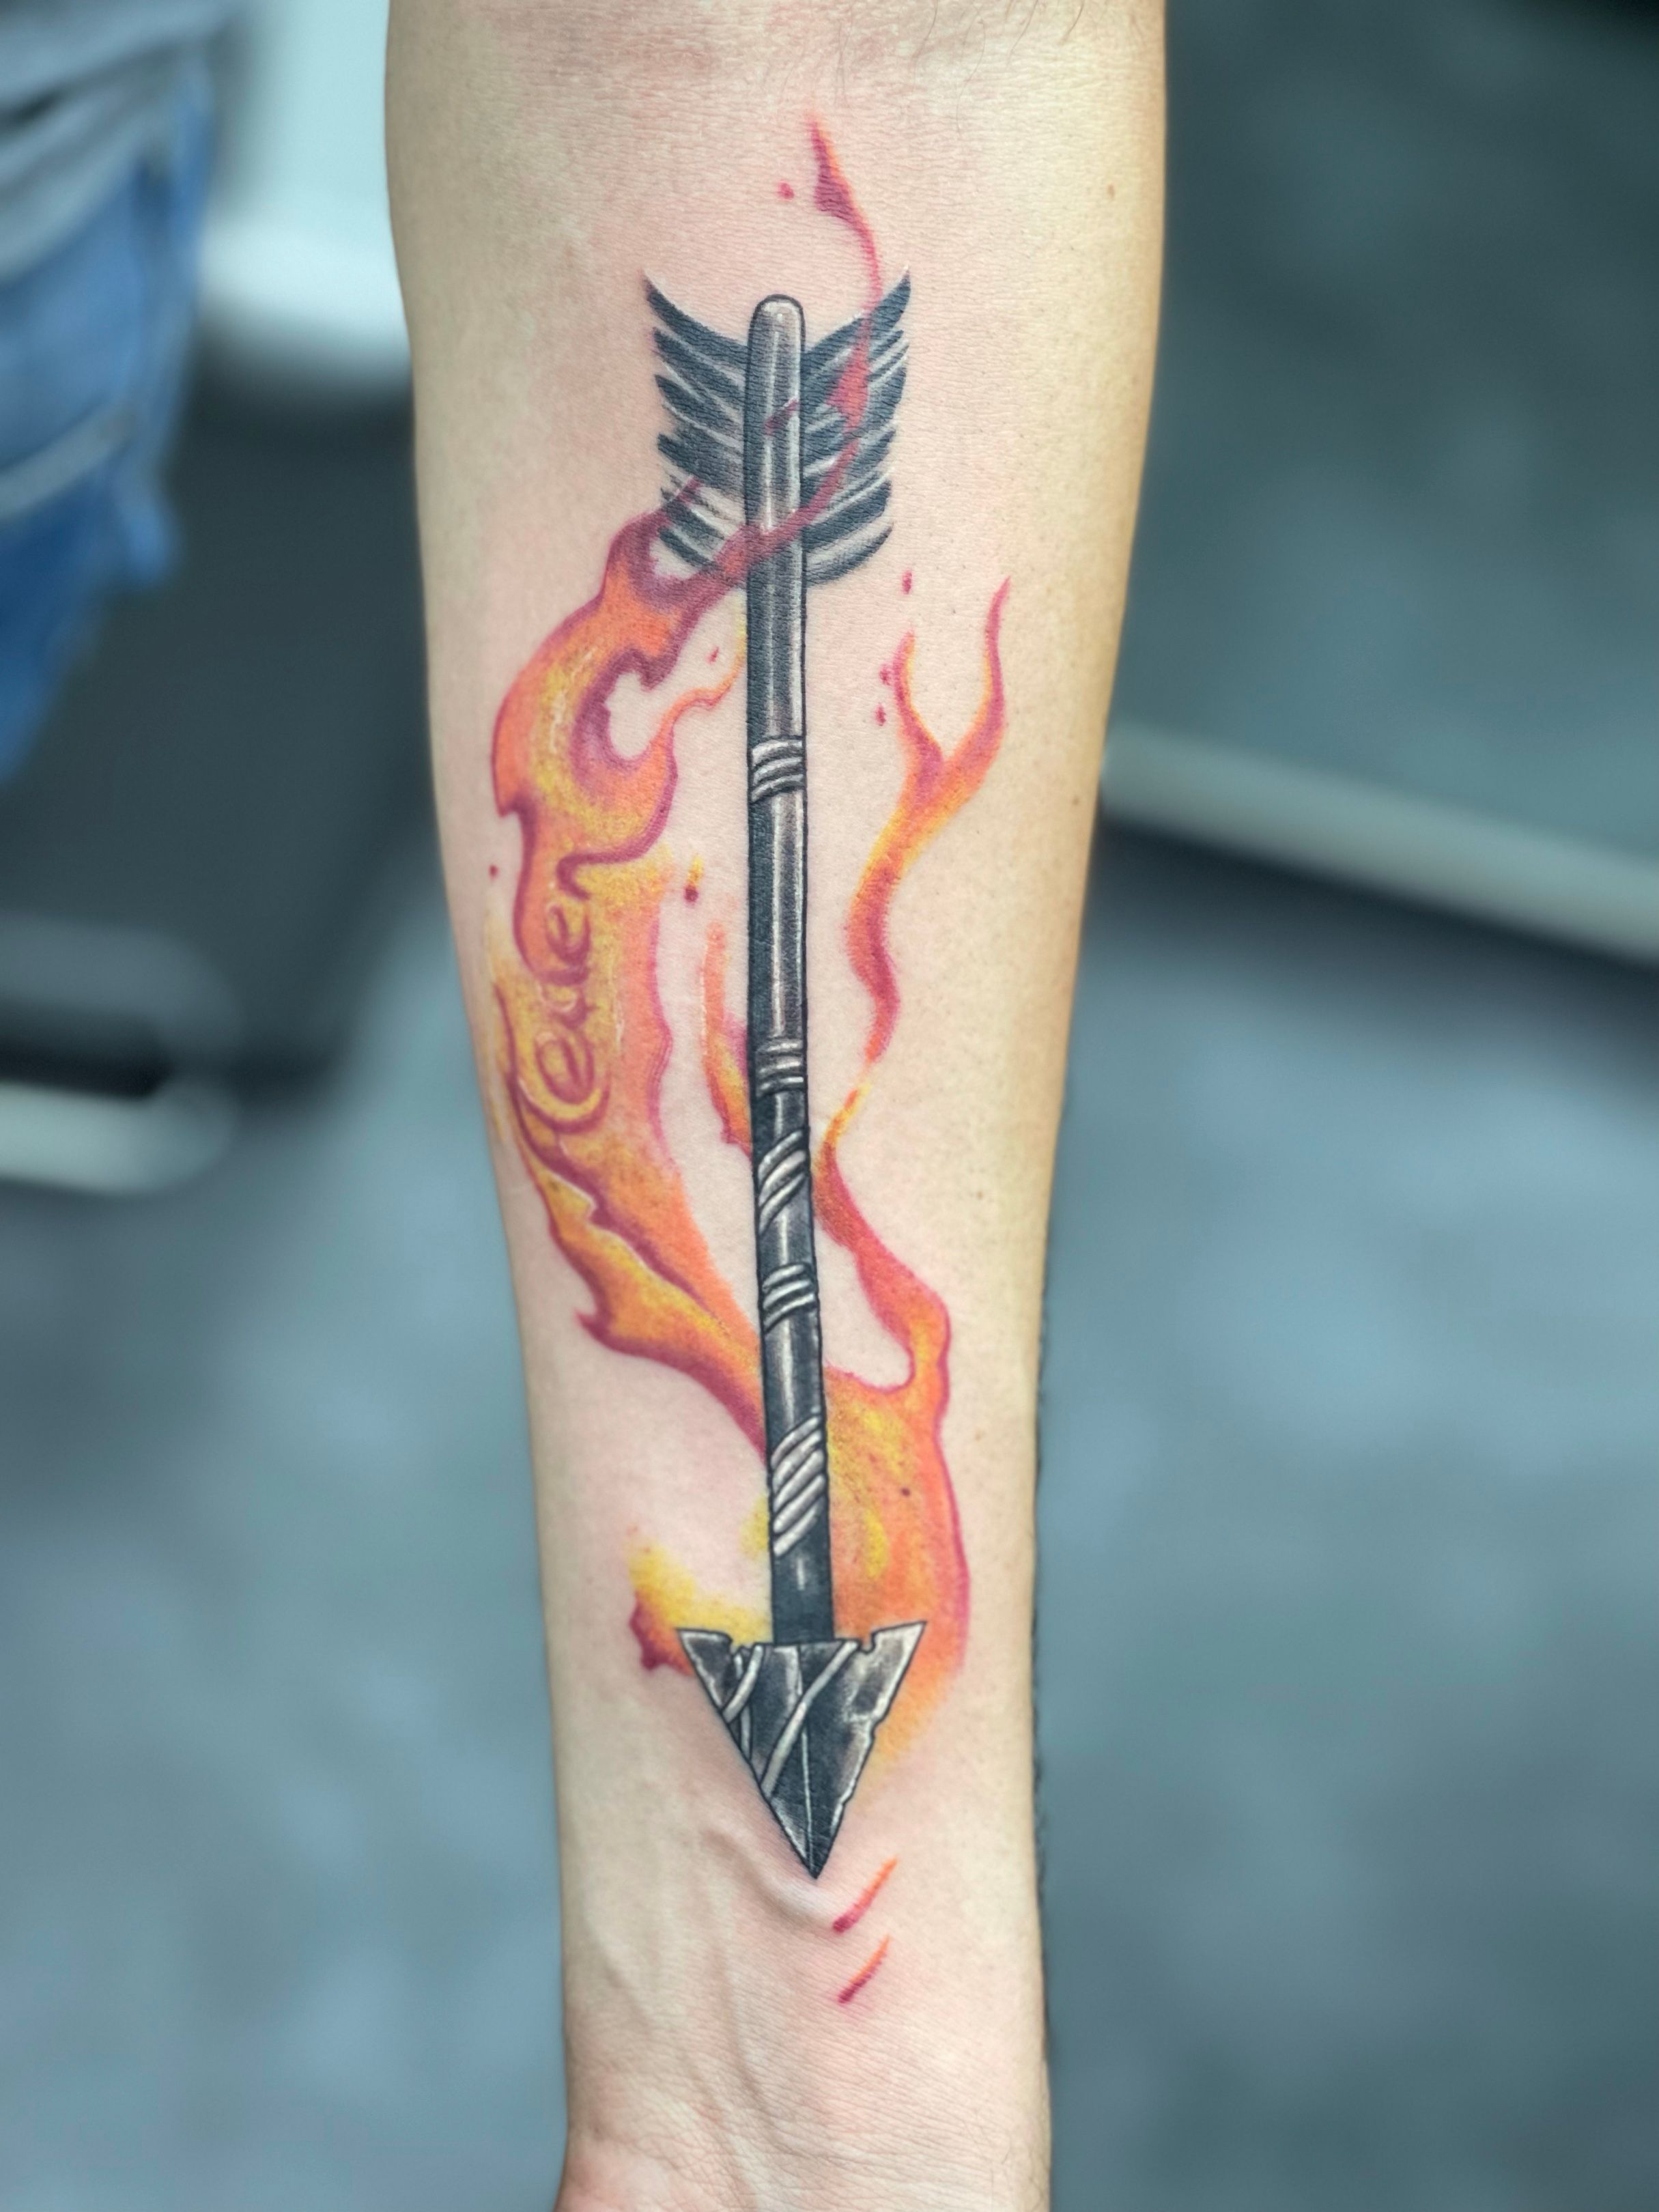 Defiance Tattoo Company - Little custom arrow on fire 🔥🤘 Tattoo by Jeremy  Woods Done with Family Tradition Stencil Axys Rotary PhucStyx TattooSupply  | Facebook